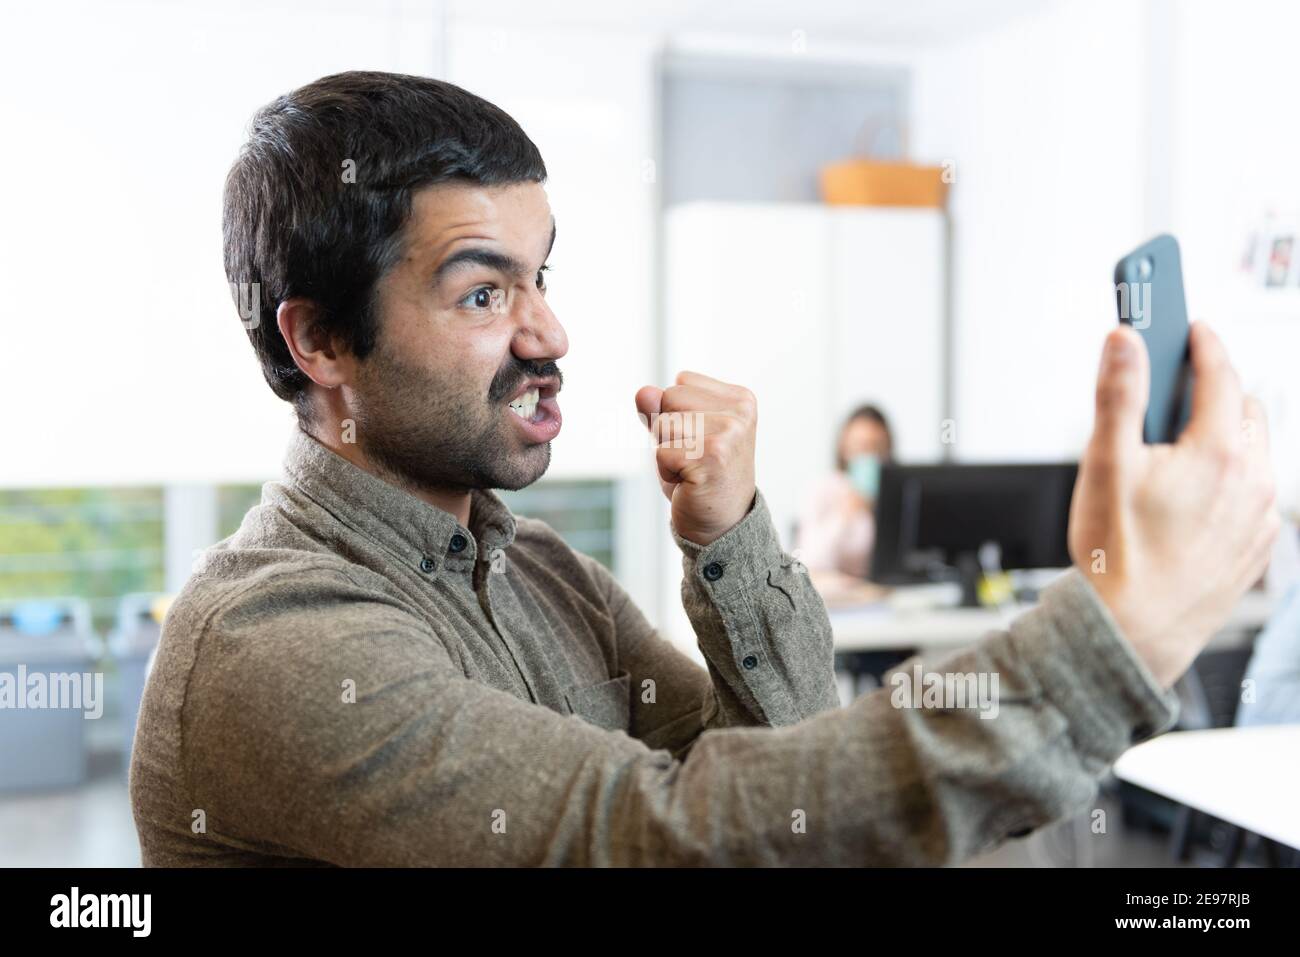 Angry hispanic man with mustache threatening with his fist up while looking at the phone Stock Photo